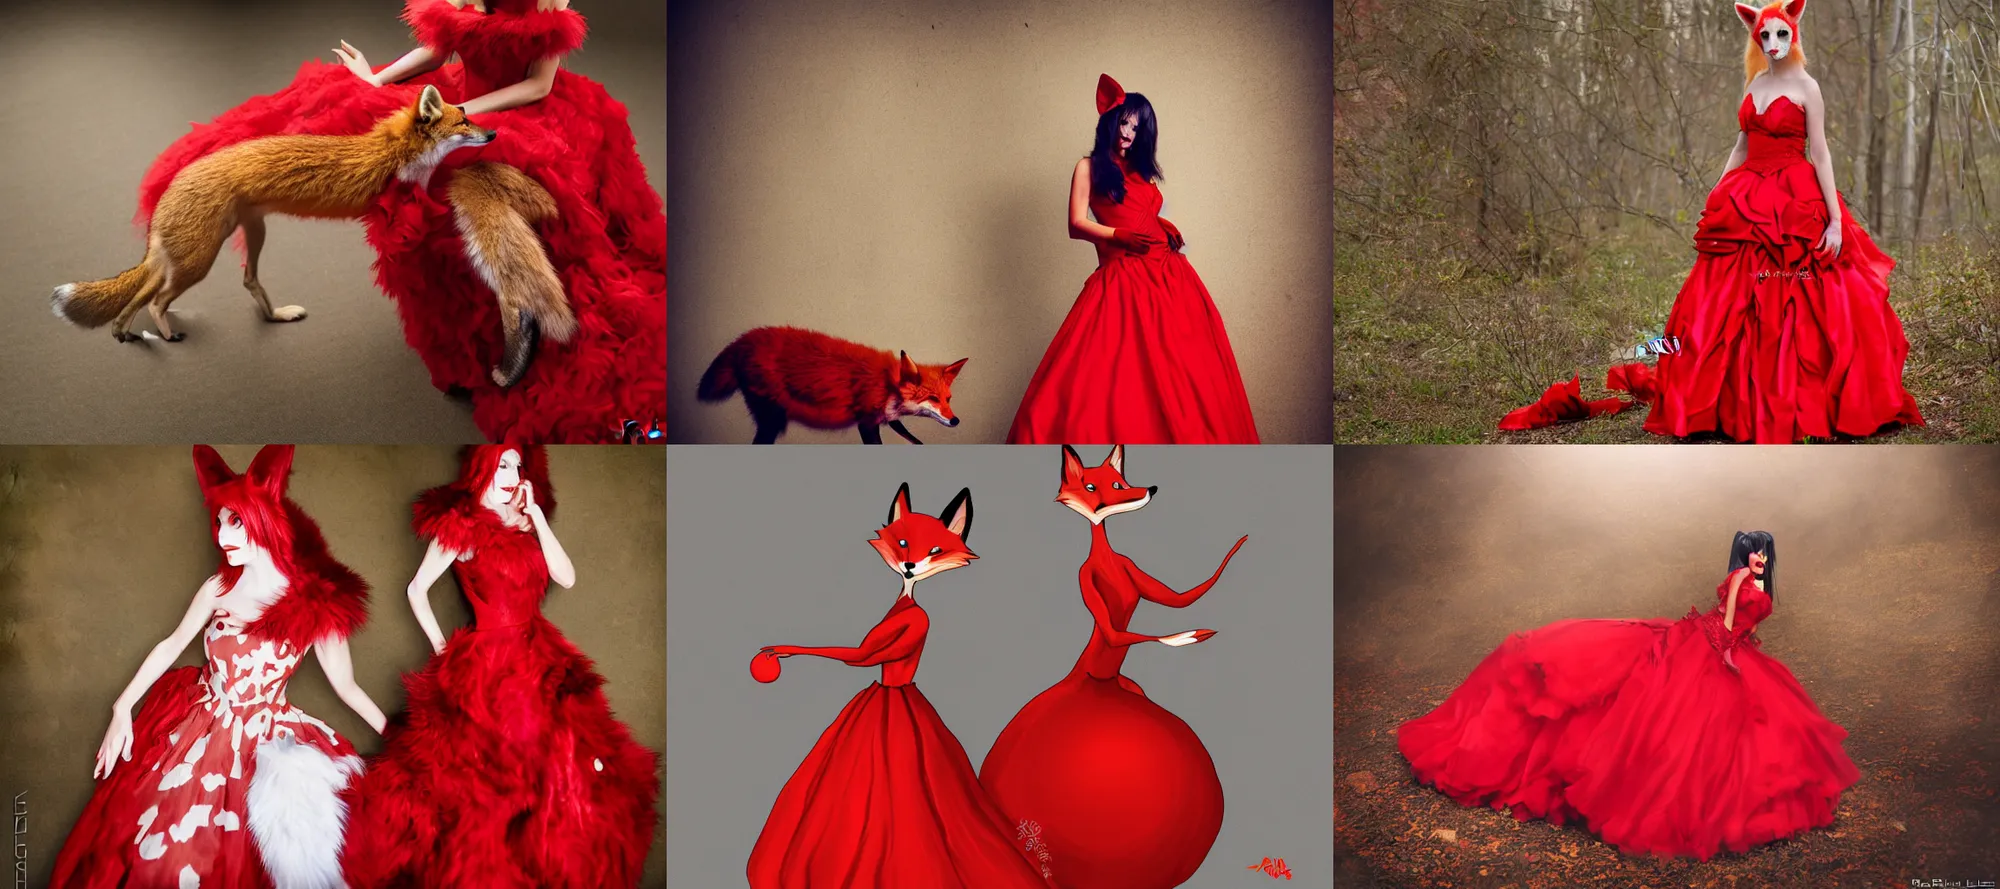 Prompt: keanu reaves anthro fox wearing red ball gown, by rilex lenov